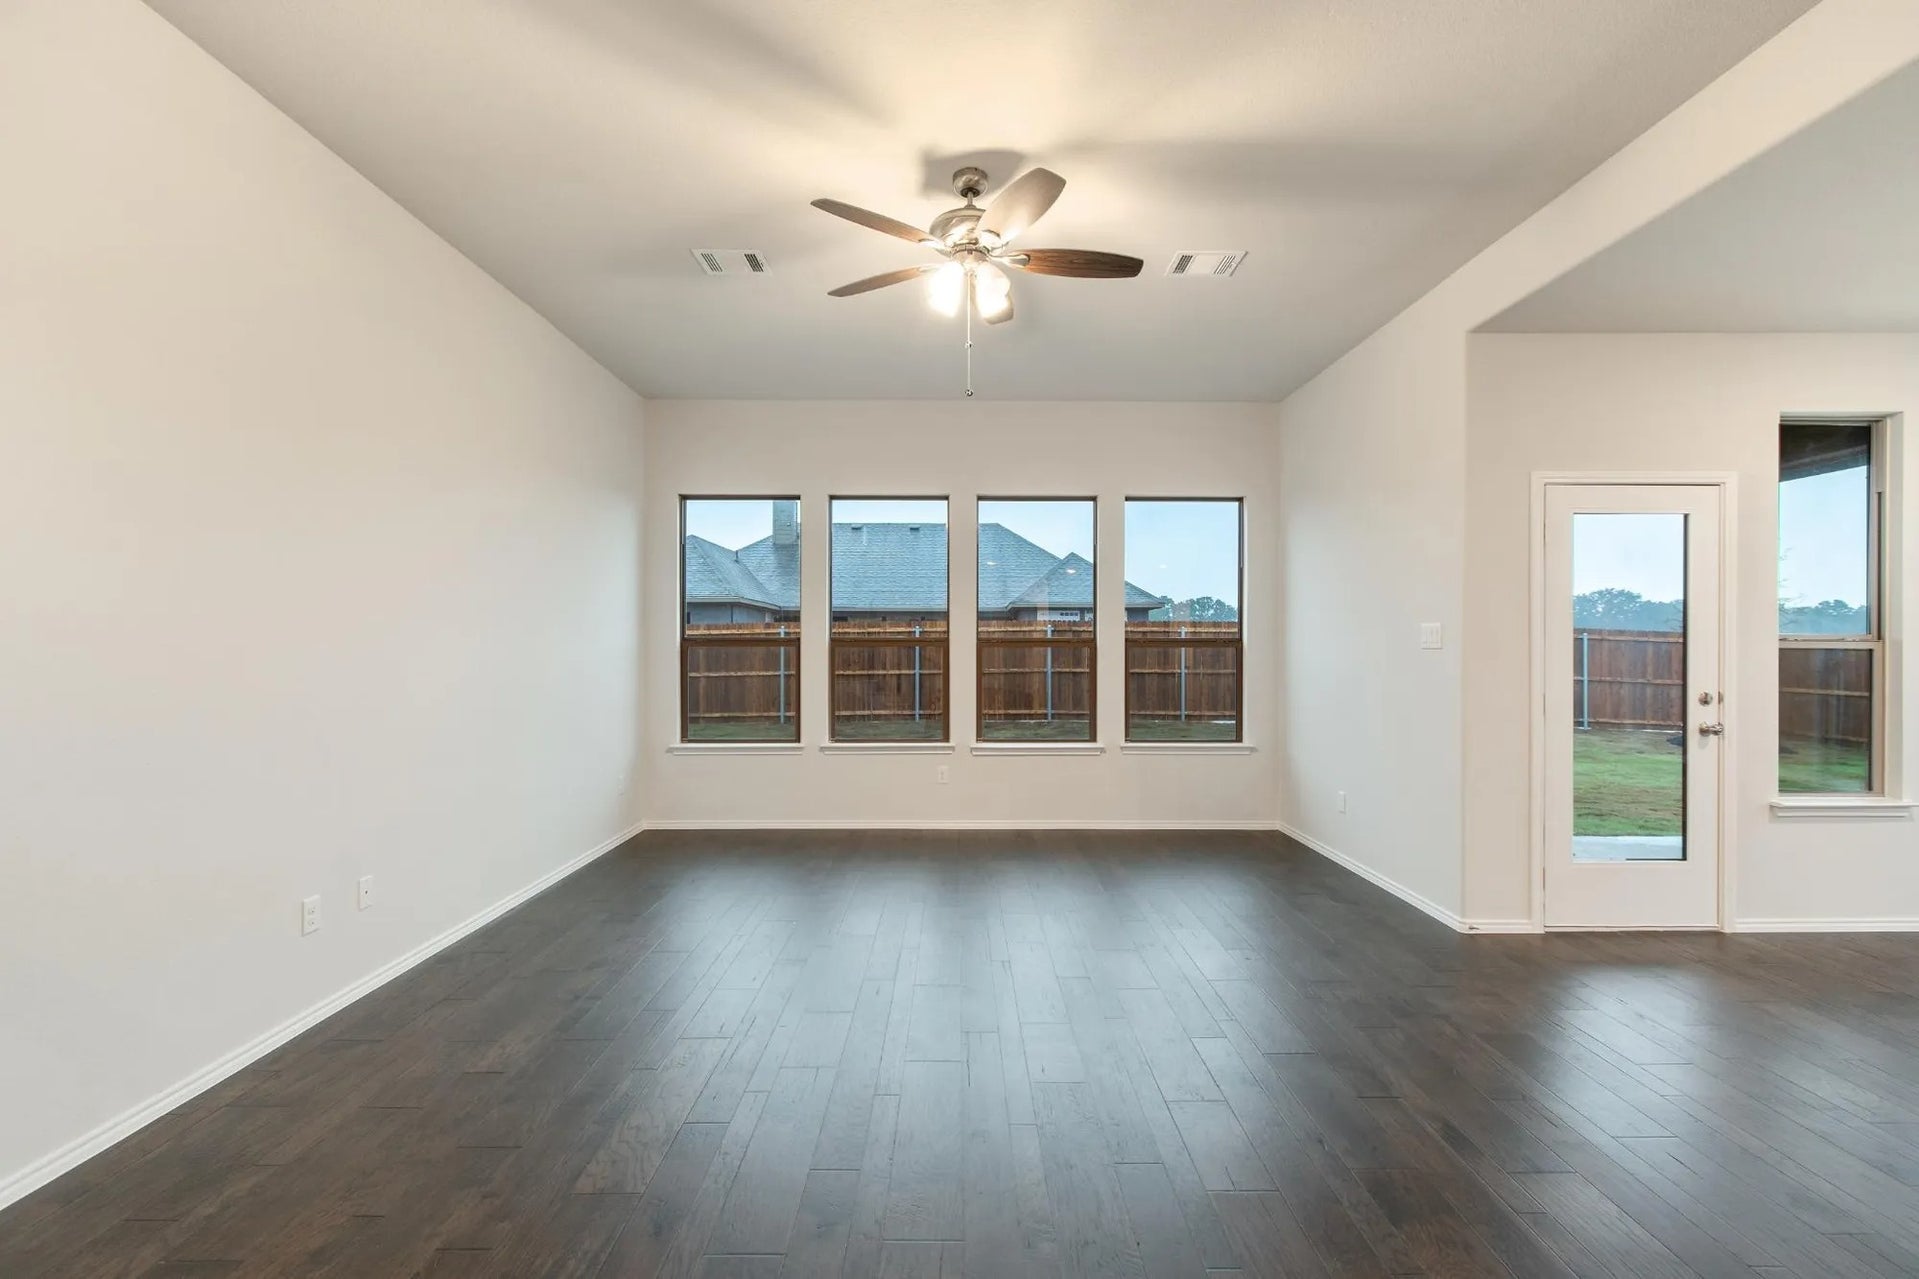 2,844sf New Home in Crowley, TX